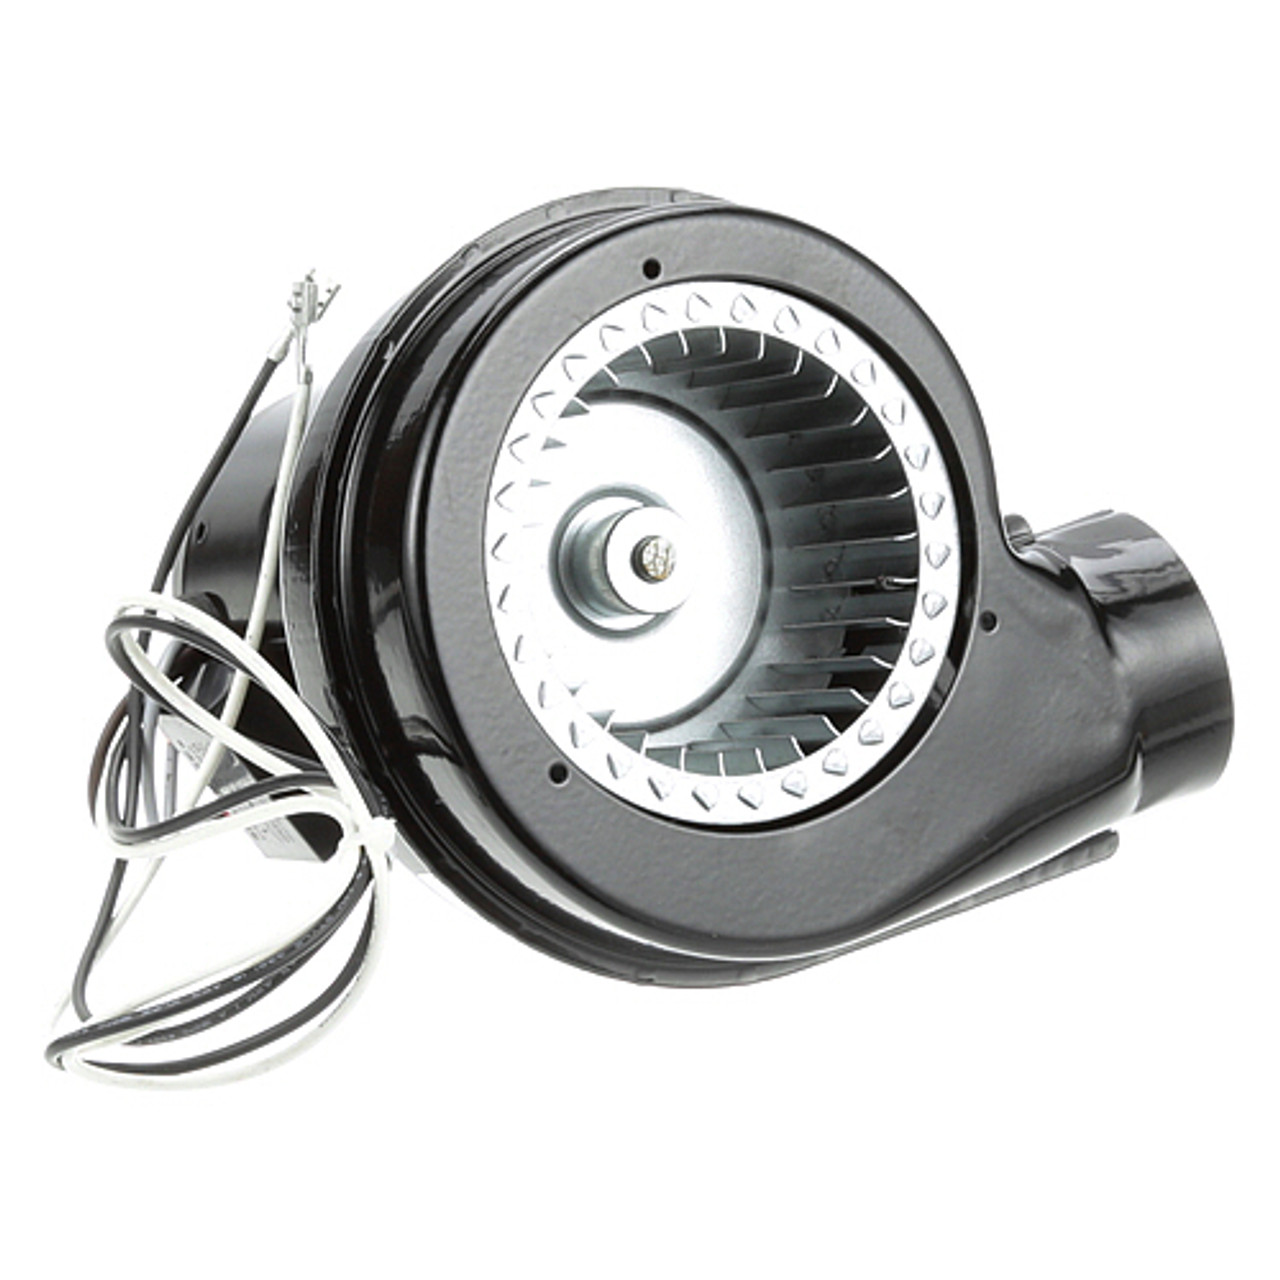 Blower Motor - Replacement Part For Wittco AD-301-2000-0